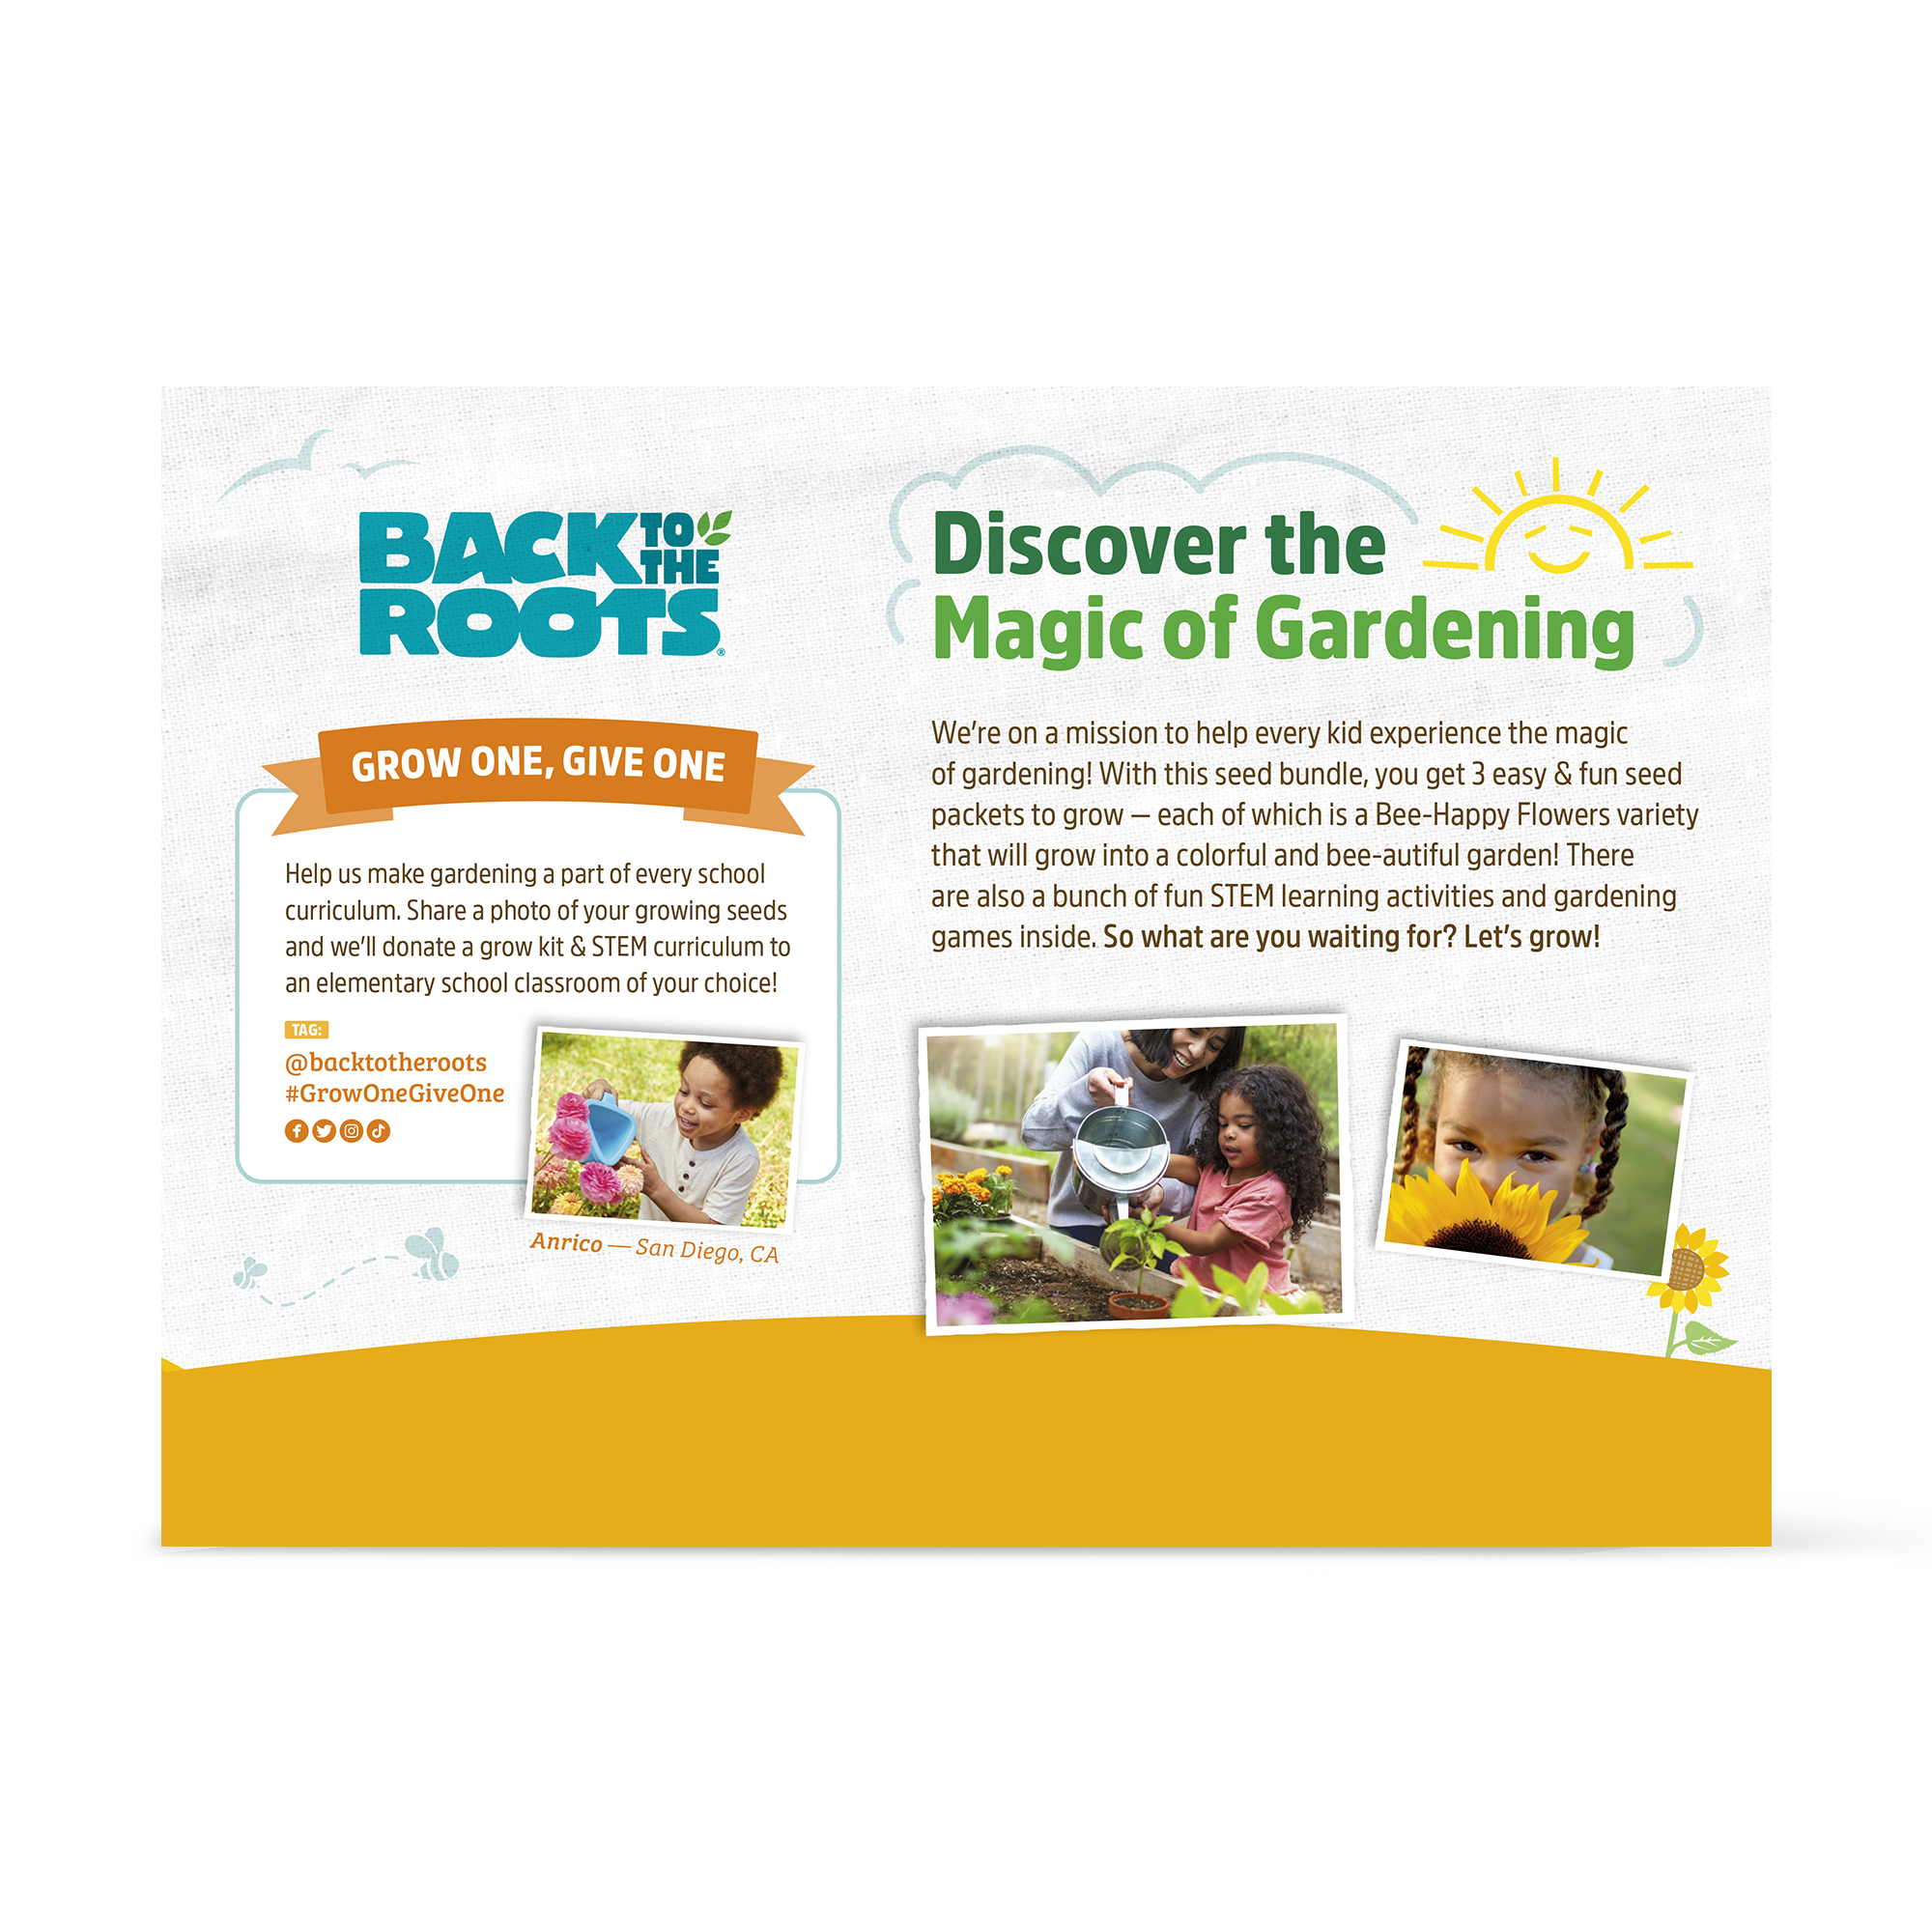 Back to the Roots Kids Gardening Organic Flower Seeds and STEM Curriculum (3 Pack) - image 2 of 5